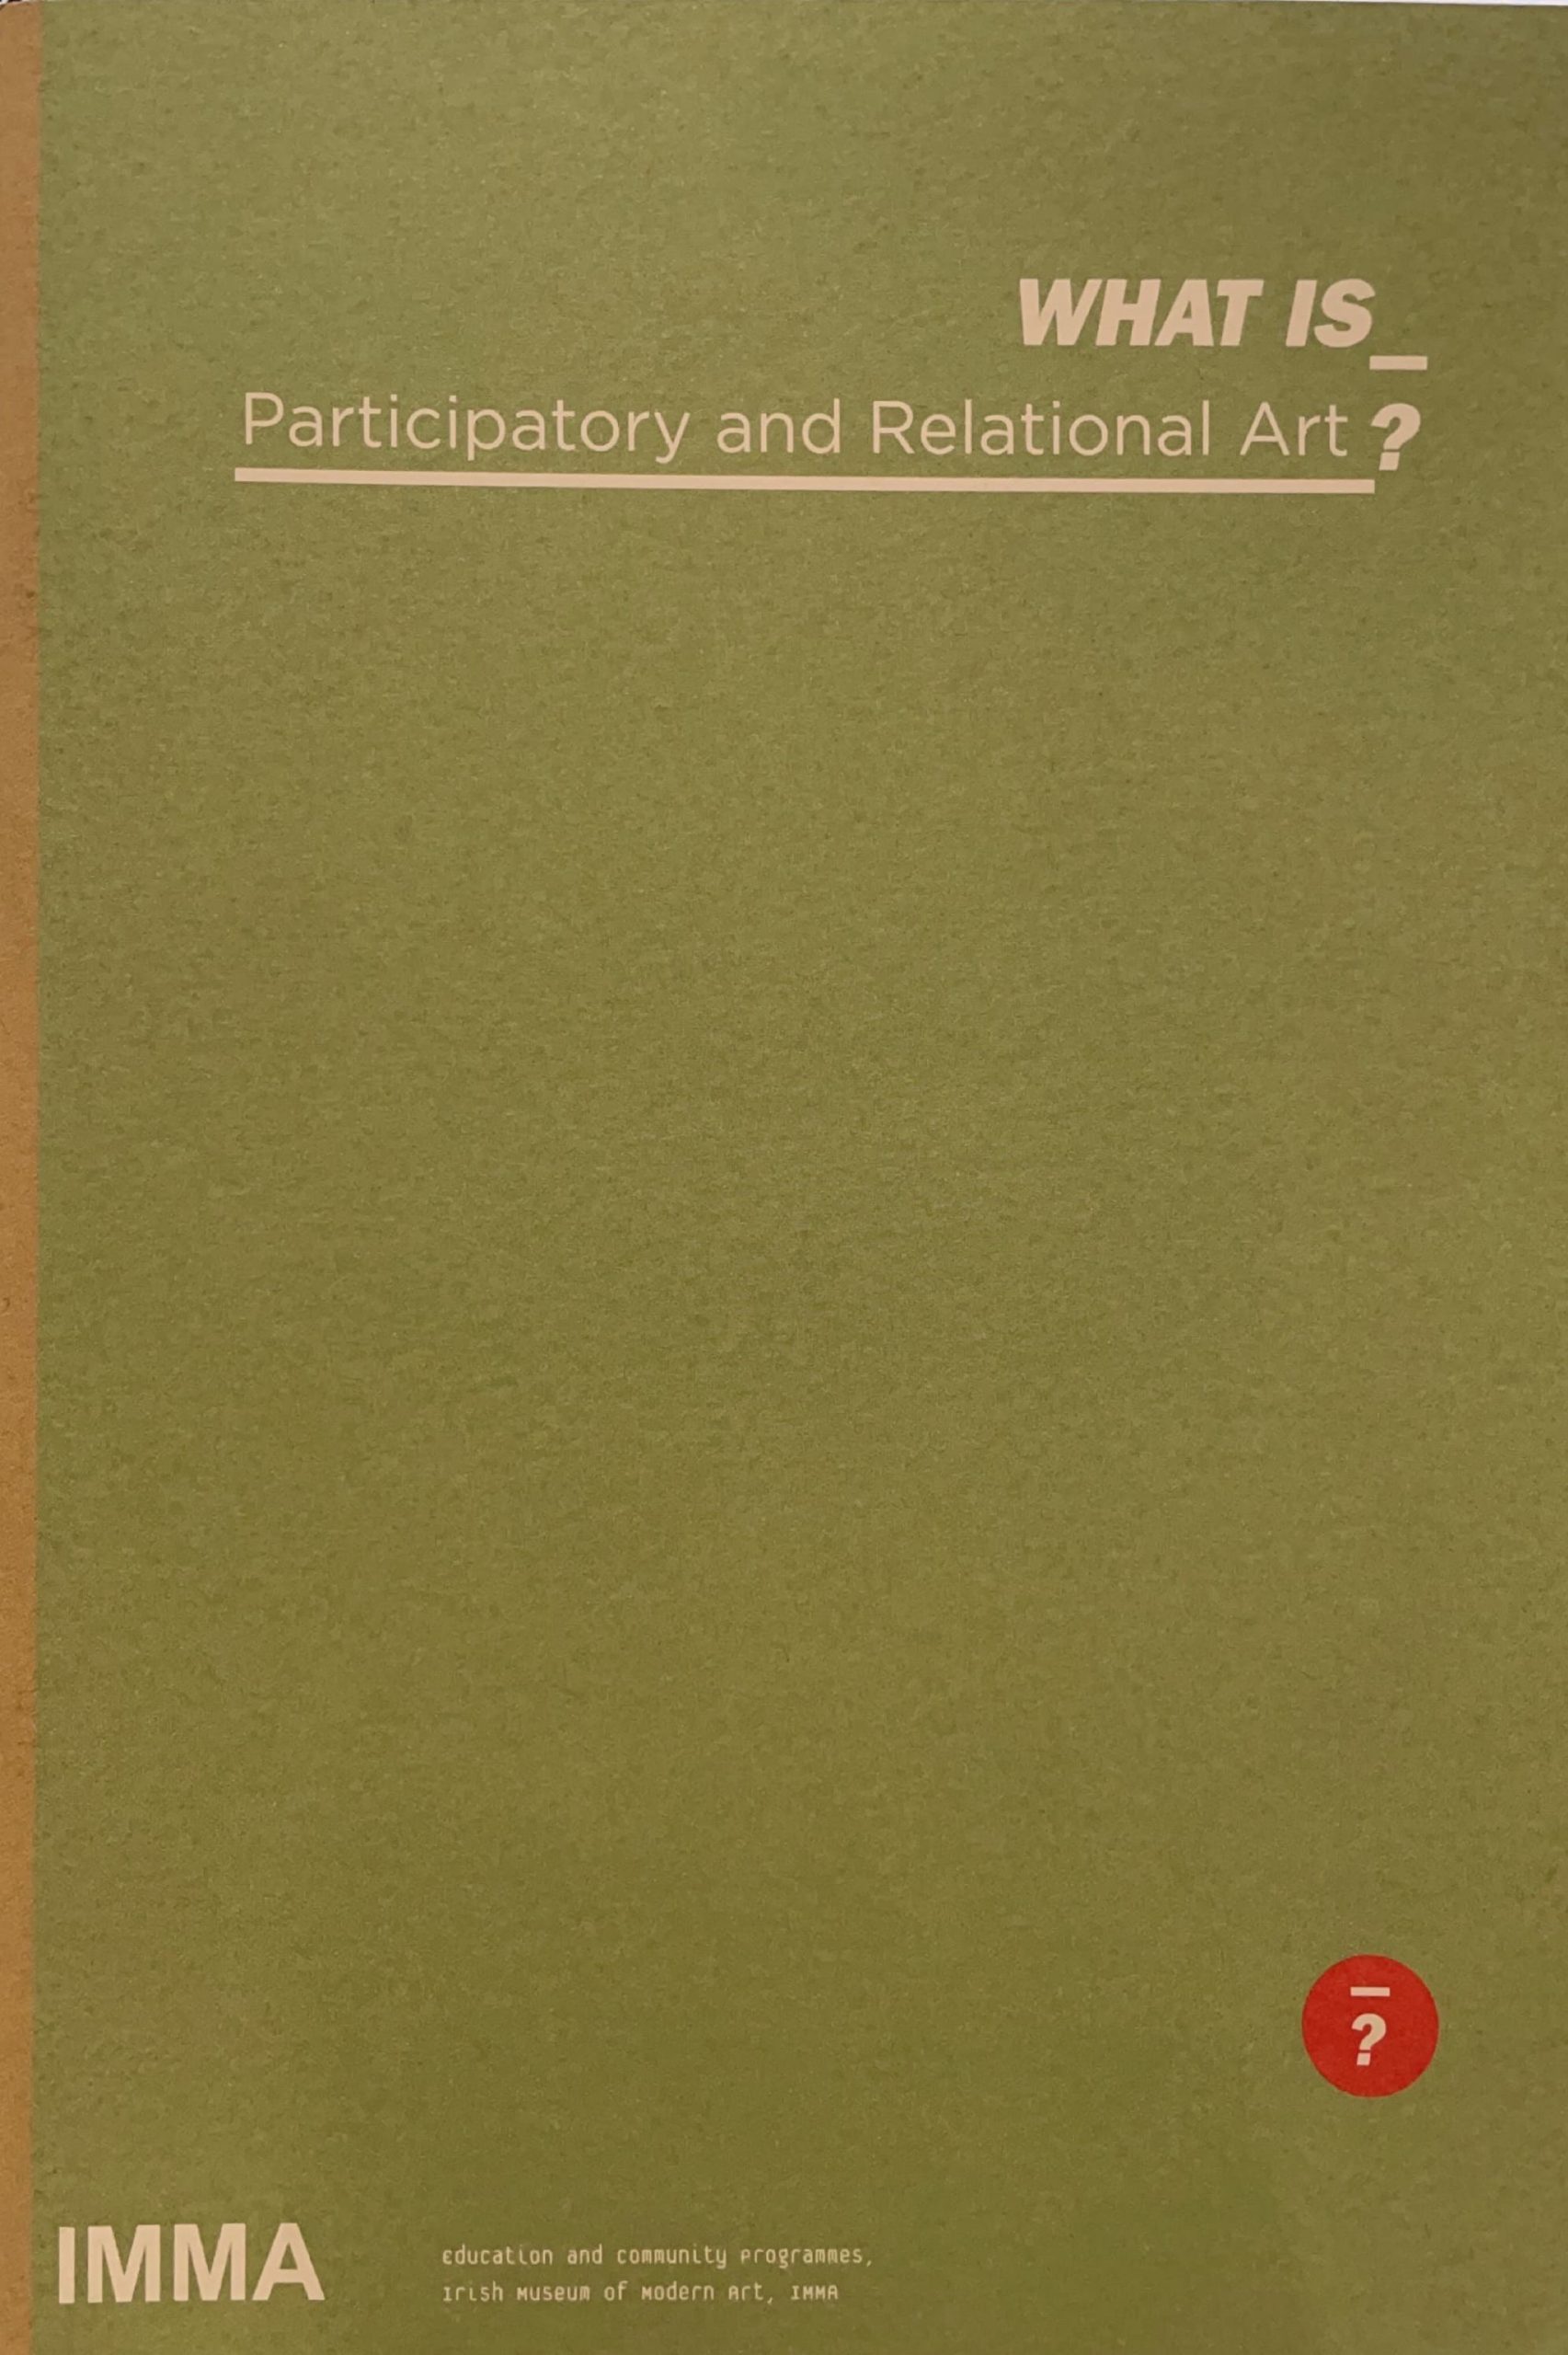 Participatory and Relational Art